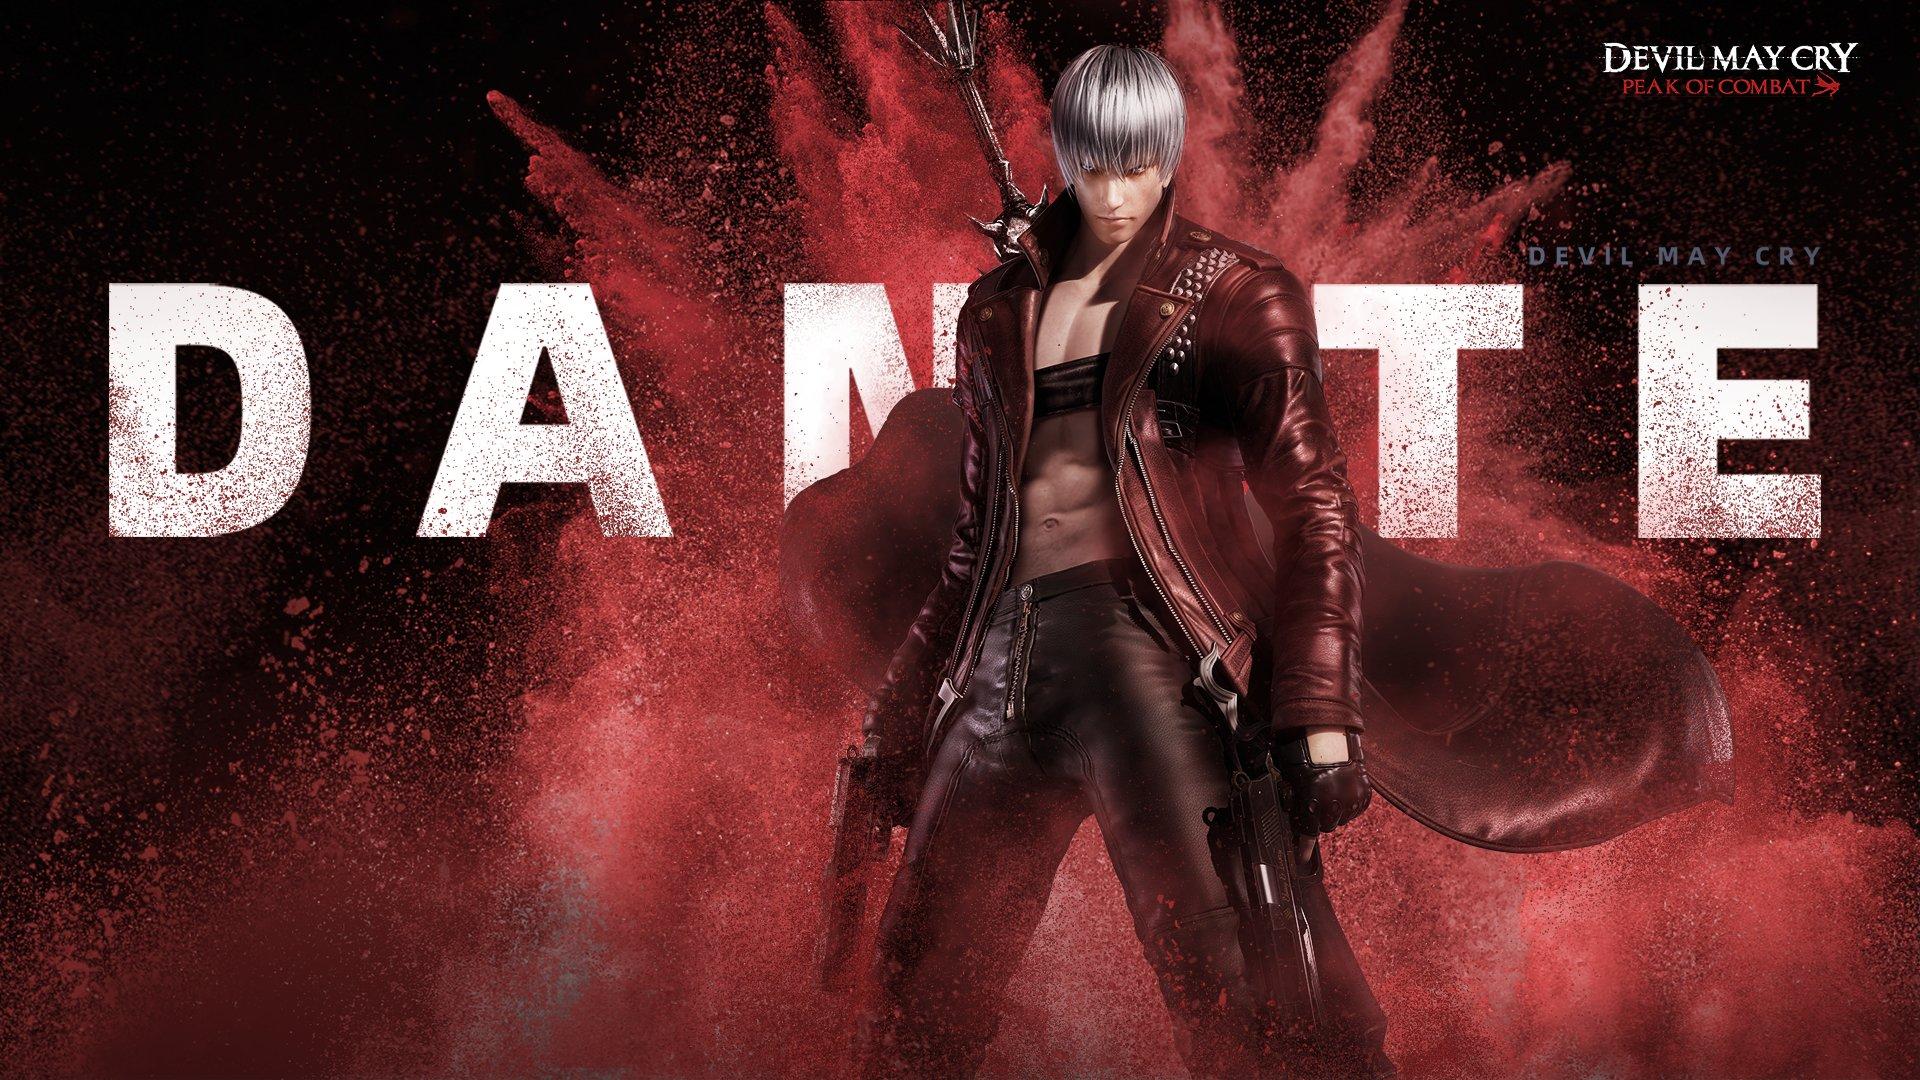 Devil May Cry: Peak of Combat global open beta test will start on